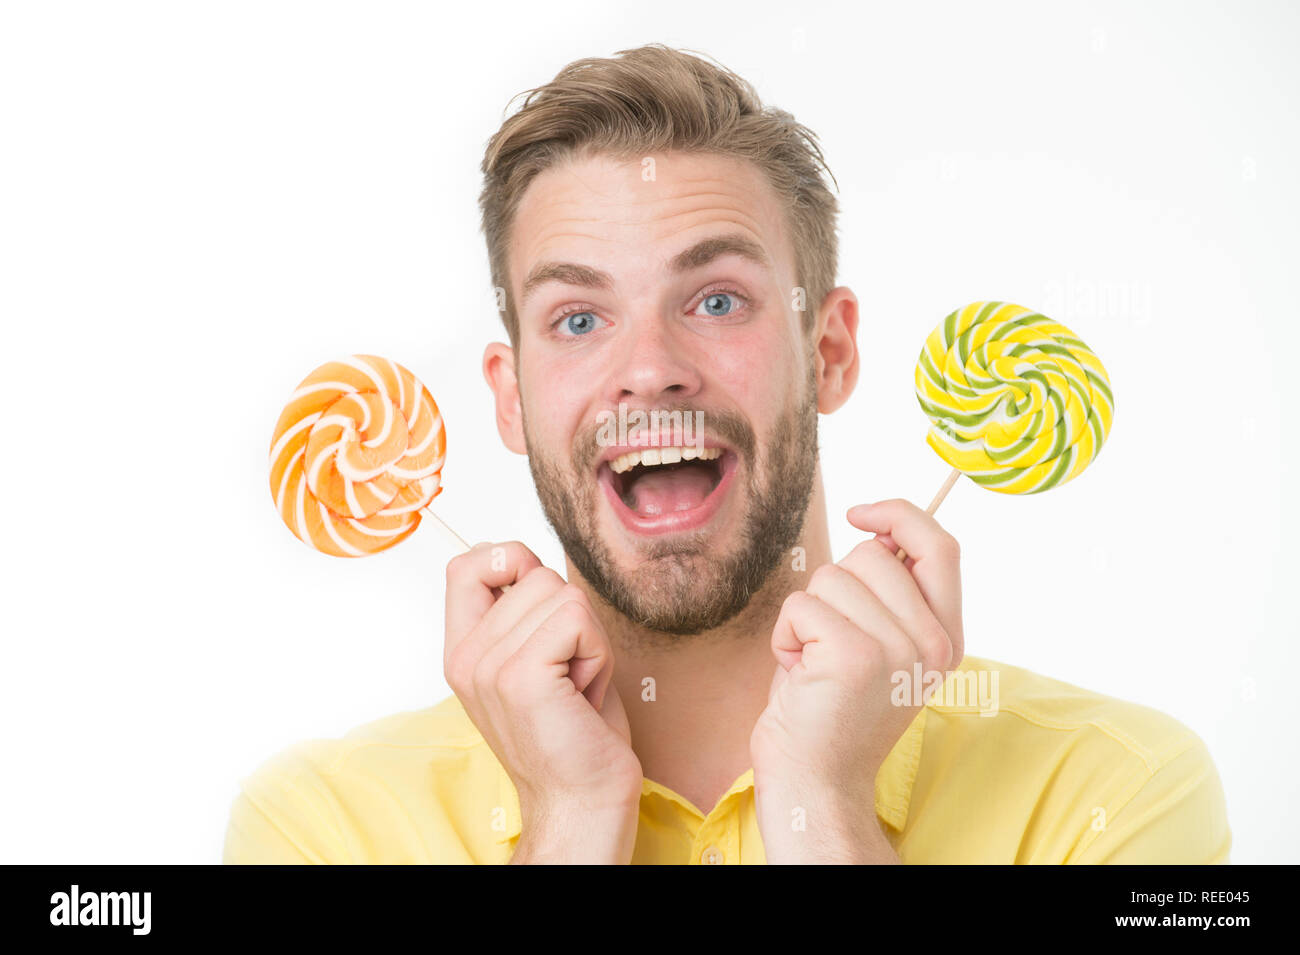 Impressing fact sugar nutrition. Man handsome bearded guy holds lollipop candy. Man with lollipop looks surprised. Healthy nutrition and dieting concept. Surprising effect sugar. Holiday sweet treats. Stock Photo